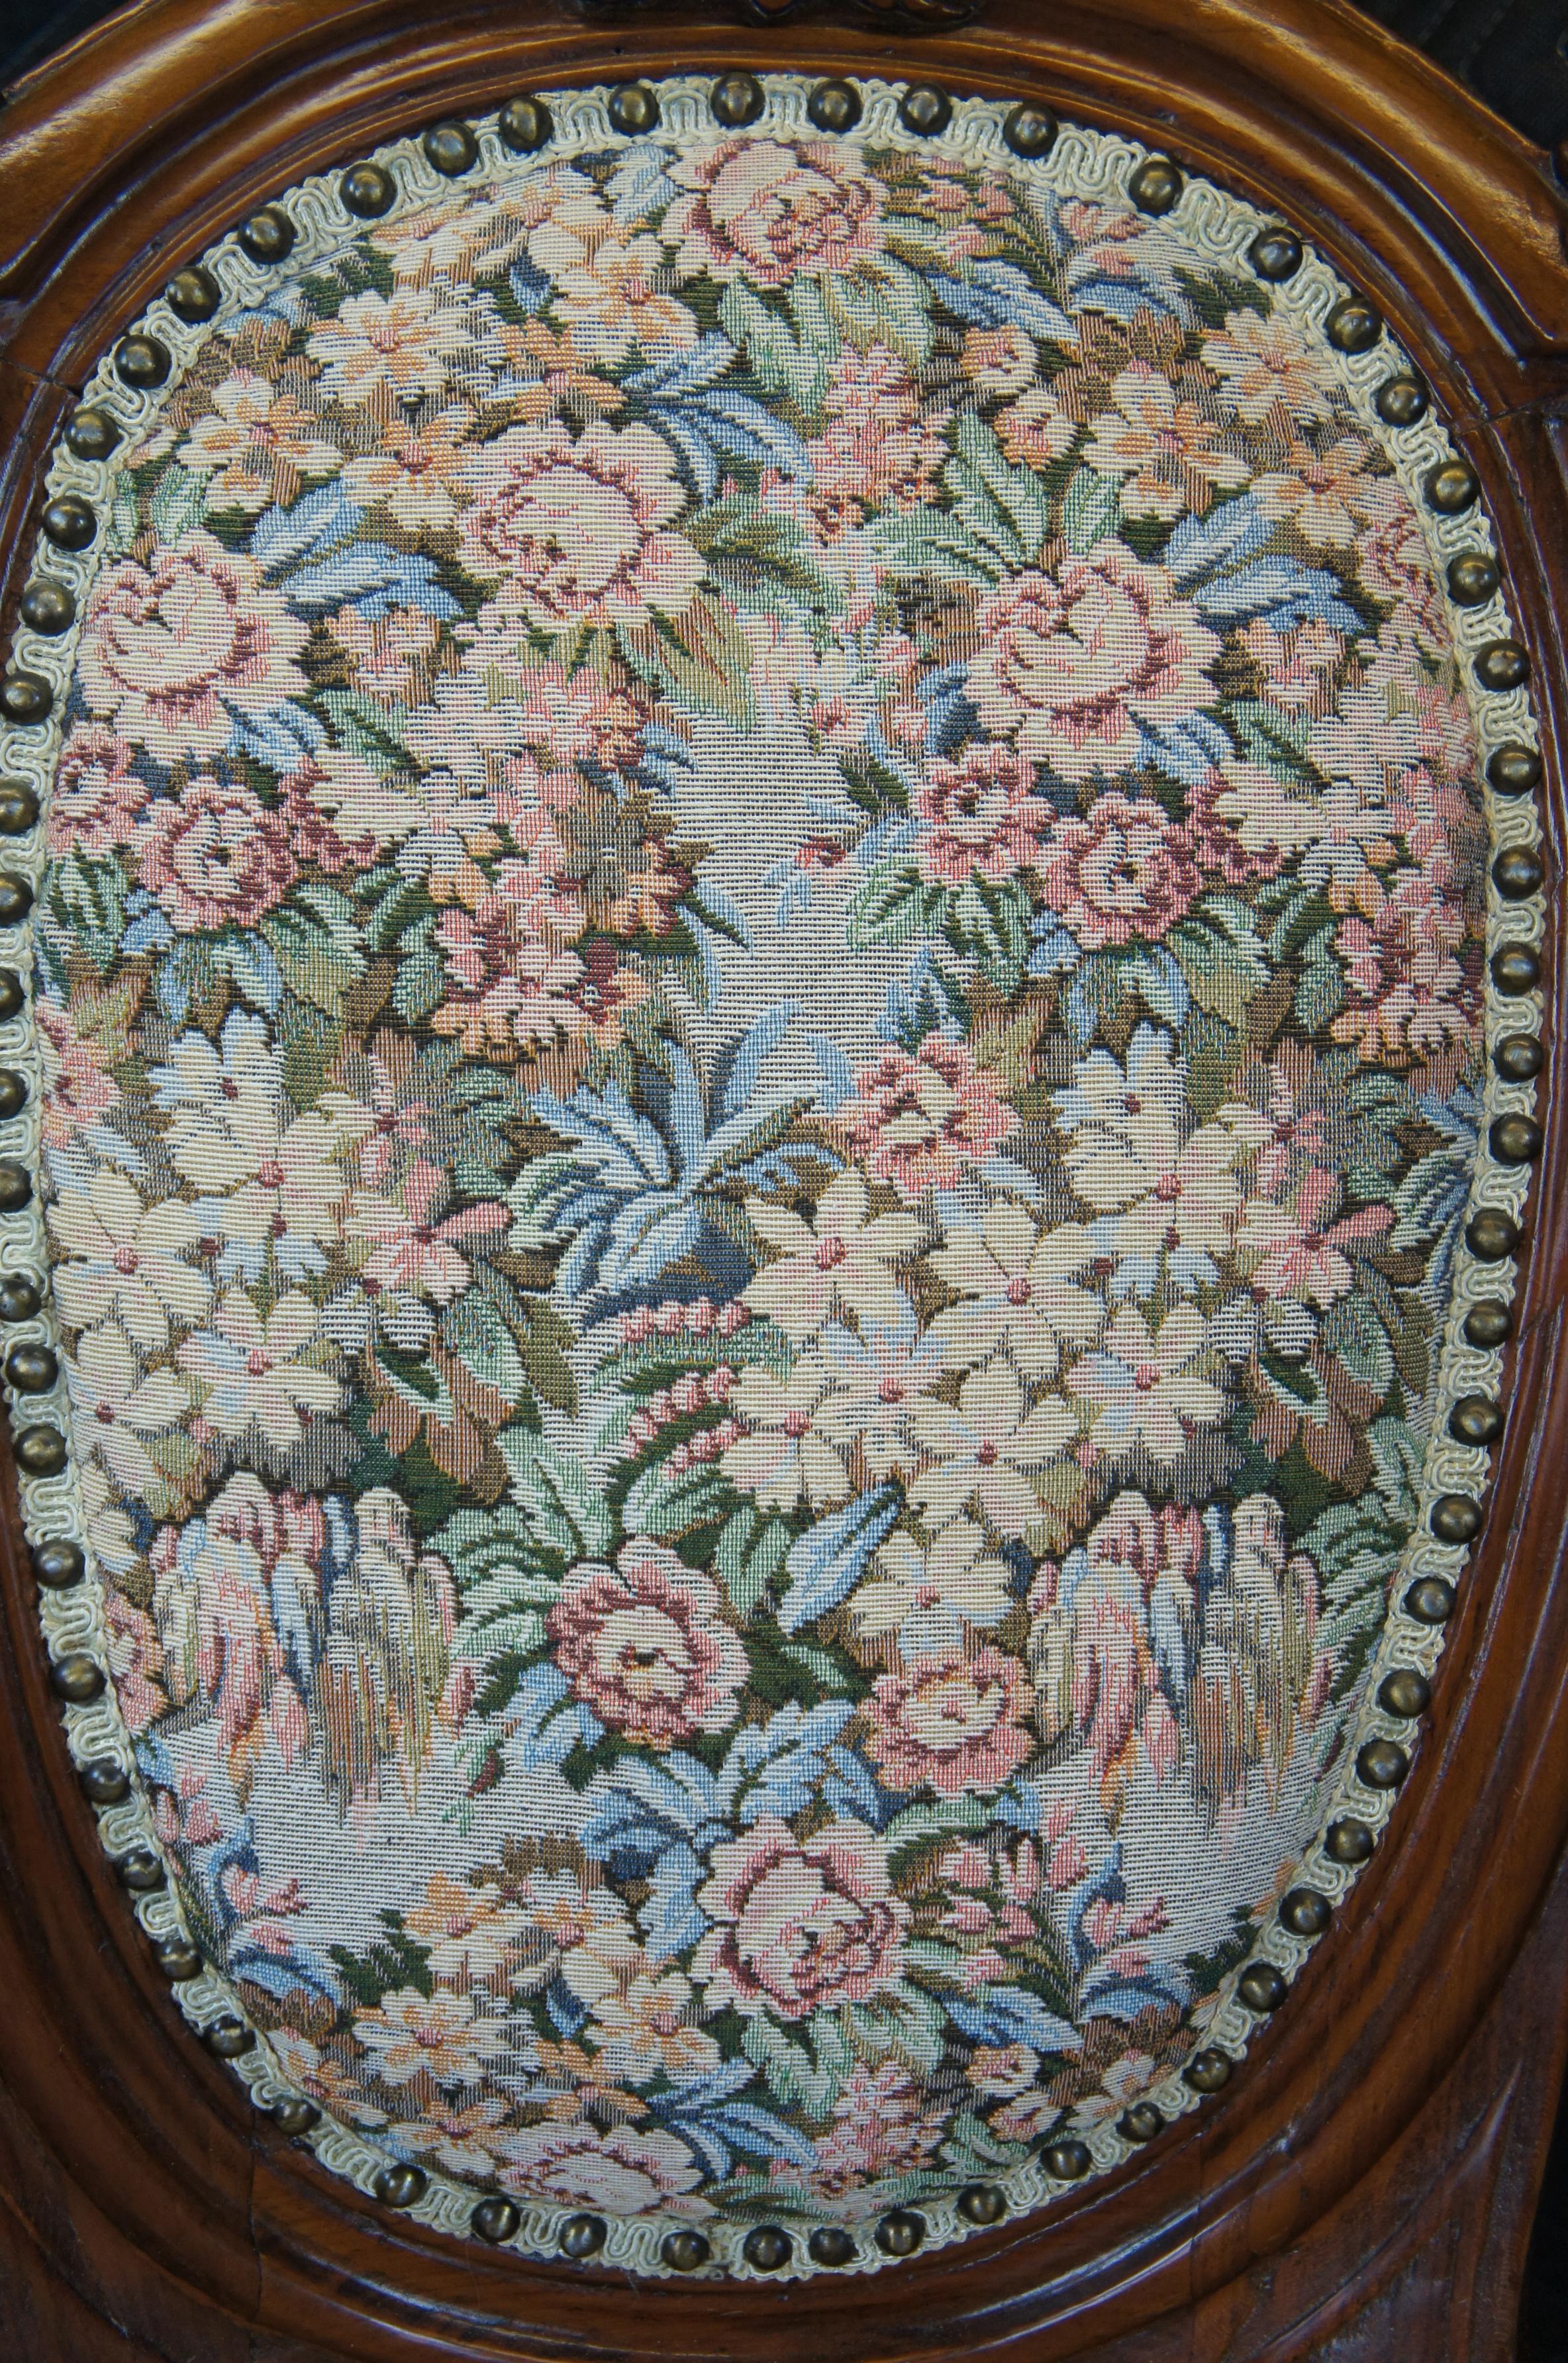 Upholstery Antique Victorian Renaissance Revival Walnut Needlepoint Parlor Dining Chair